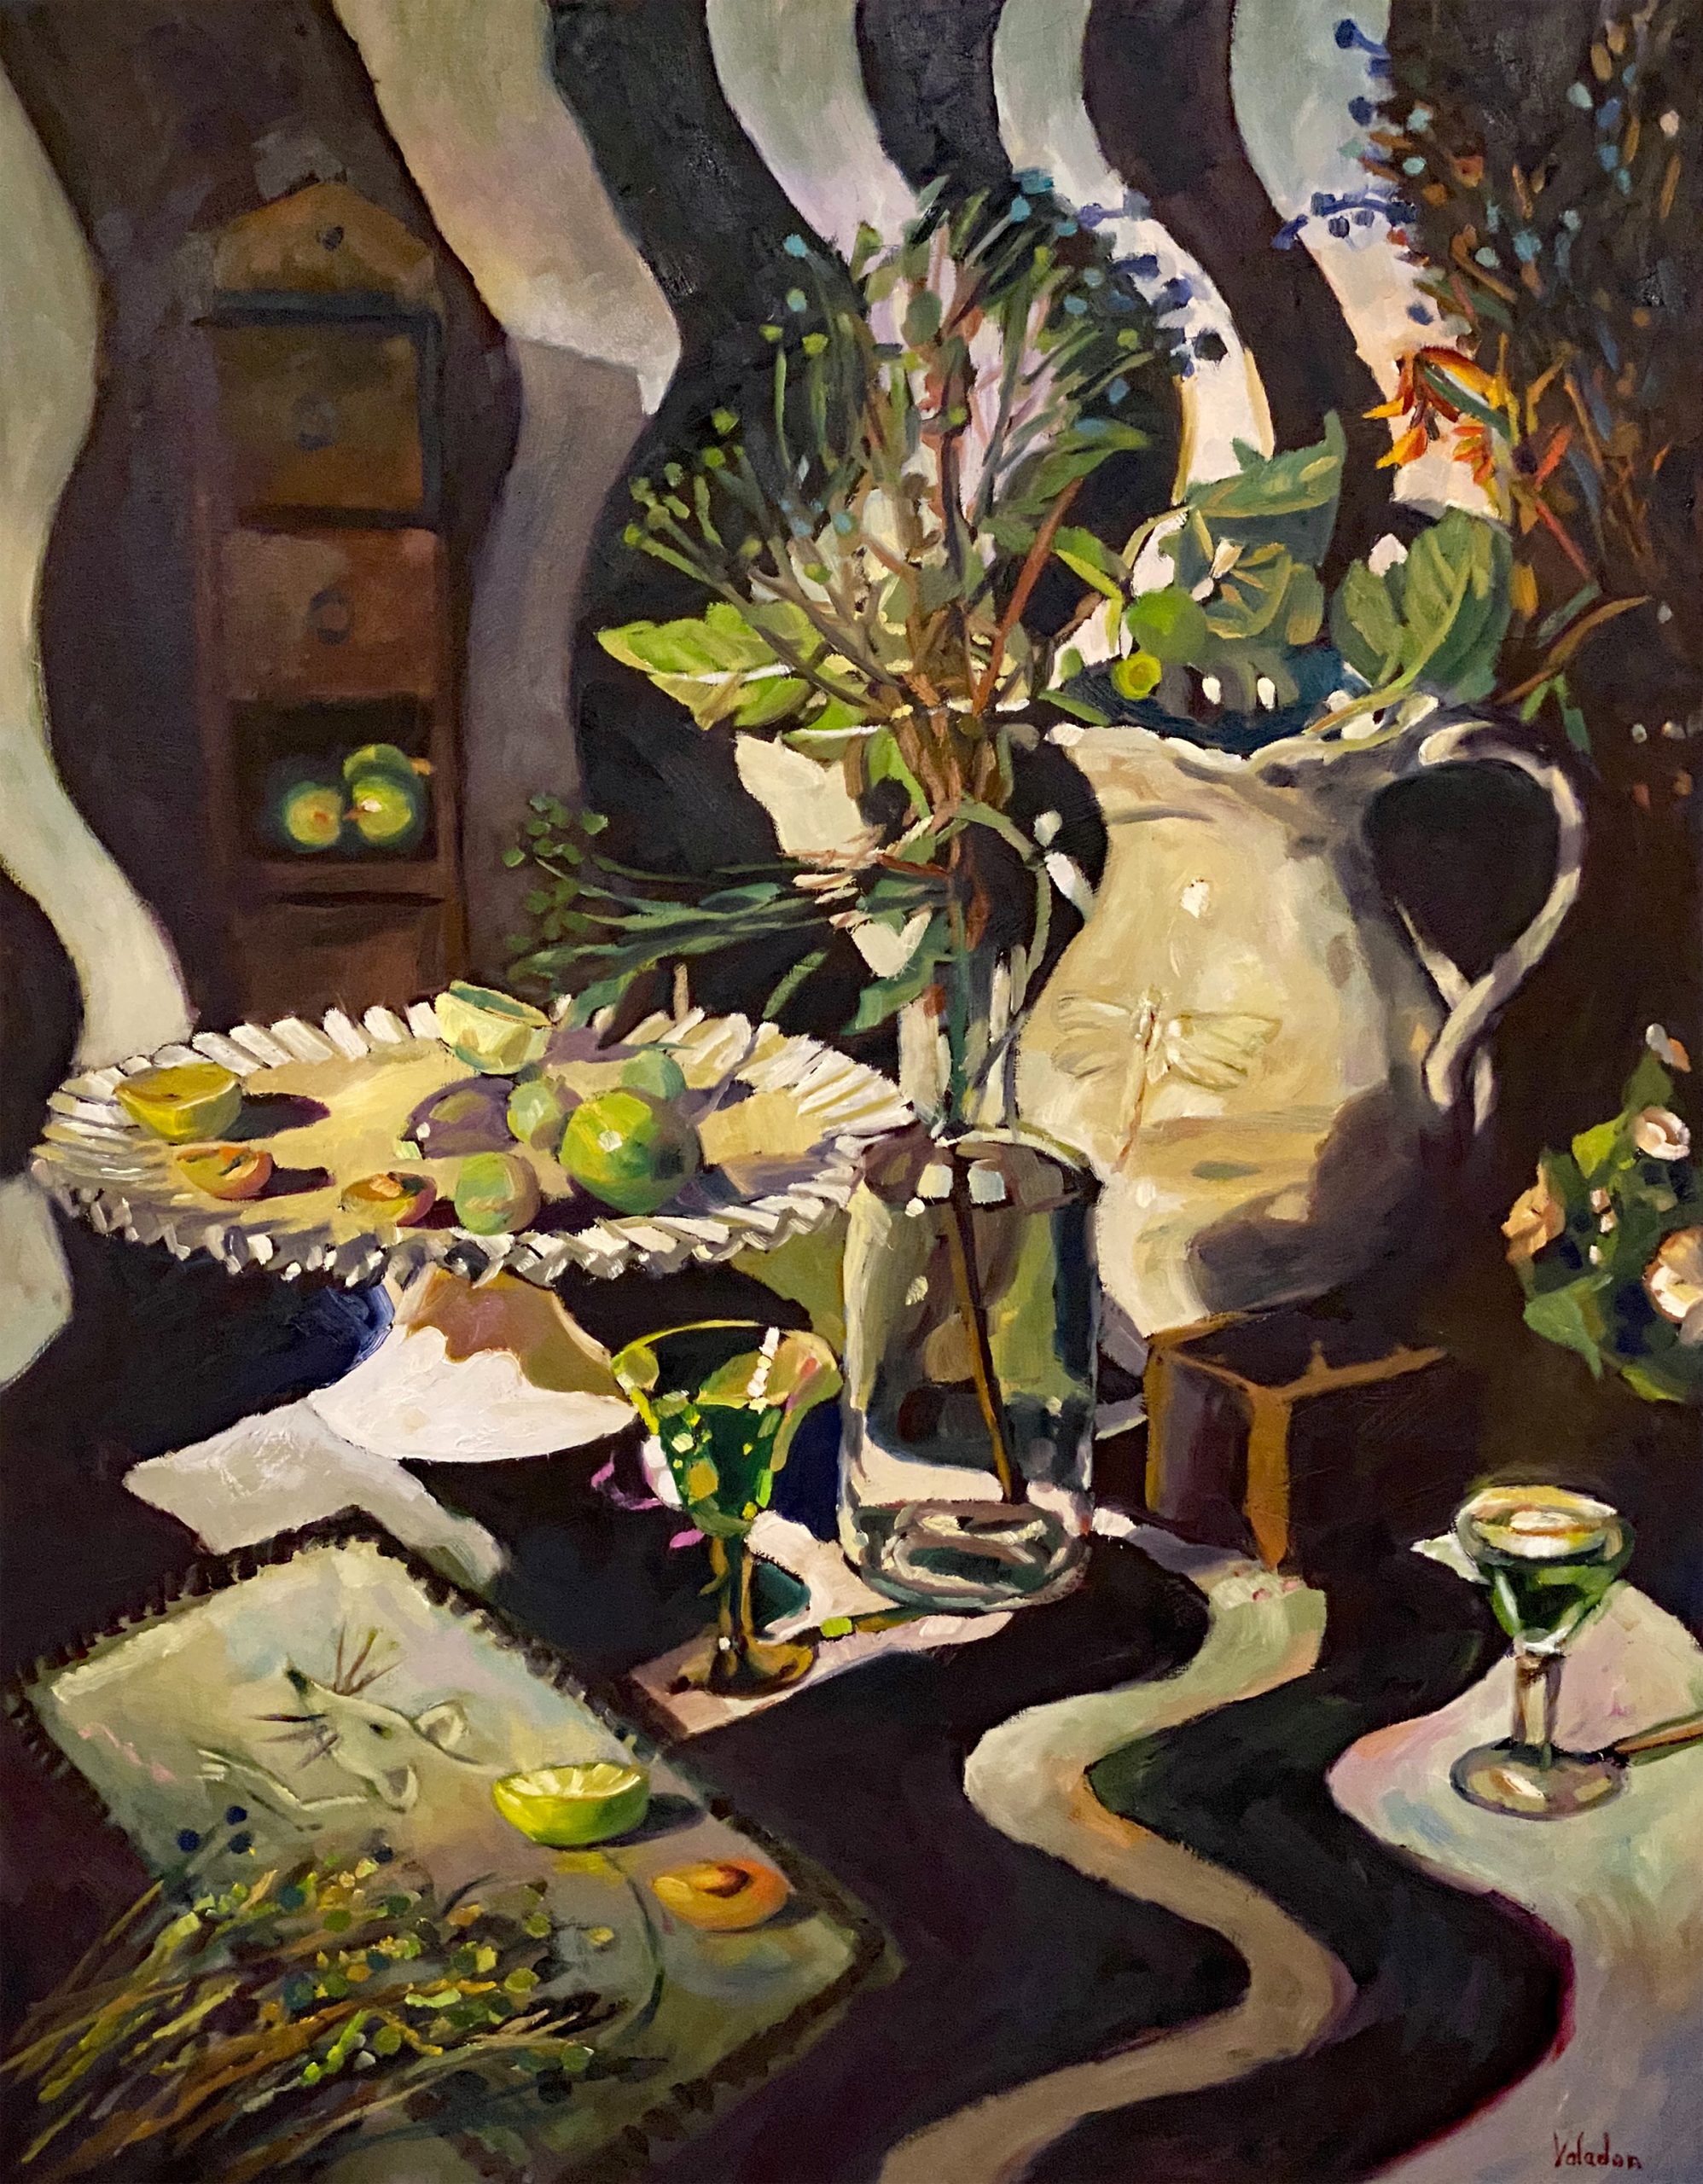 Rosemary Valadon 'The Mouse and the Dragonfly' oil on linen 122 x 91cm $22,000 SOLD